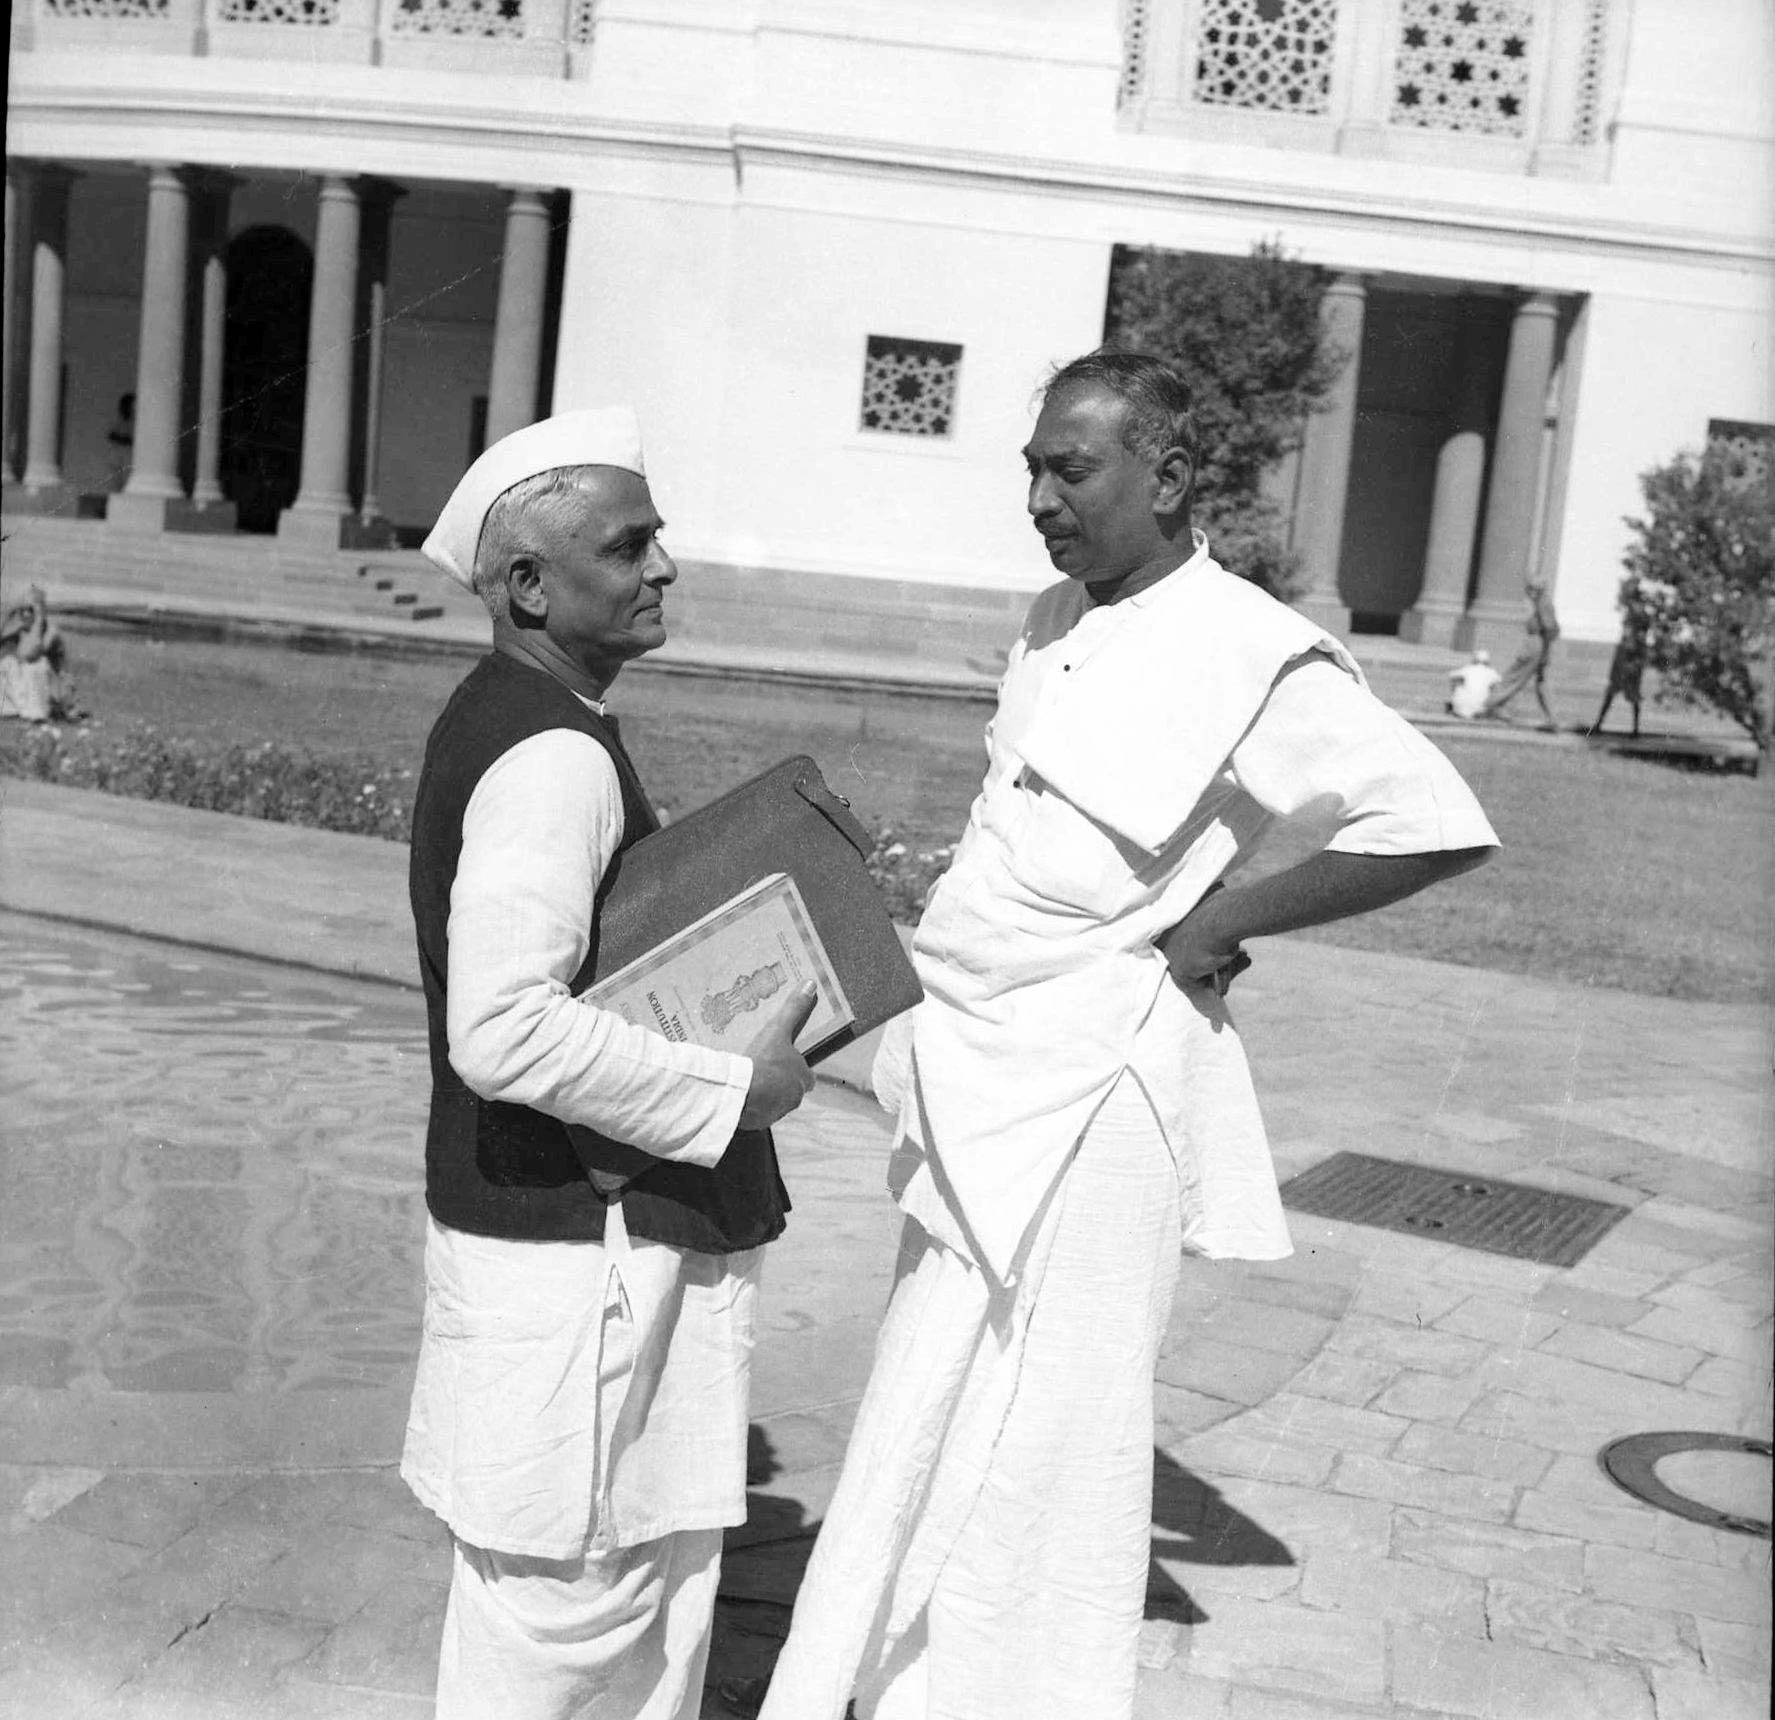 K KAMARAJ WITH RR DIWAKAR (UNION MINISTER FOR INFORMATION AND BROADCASTING).